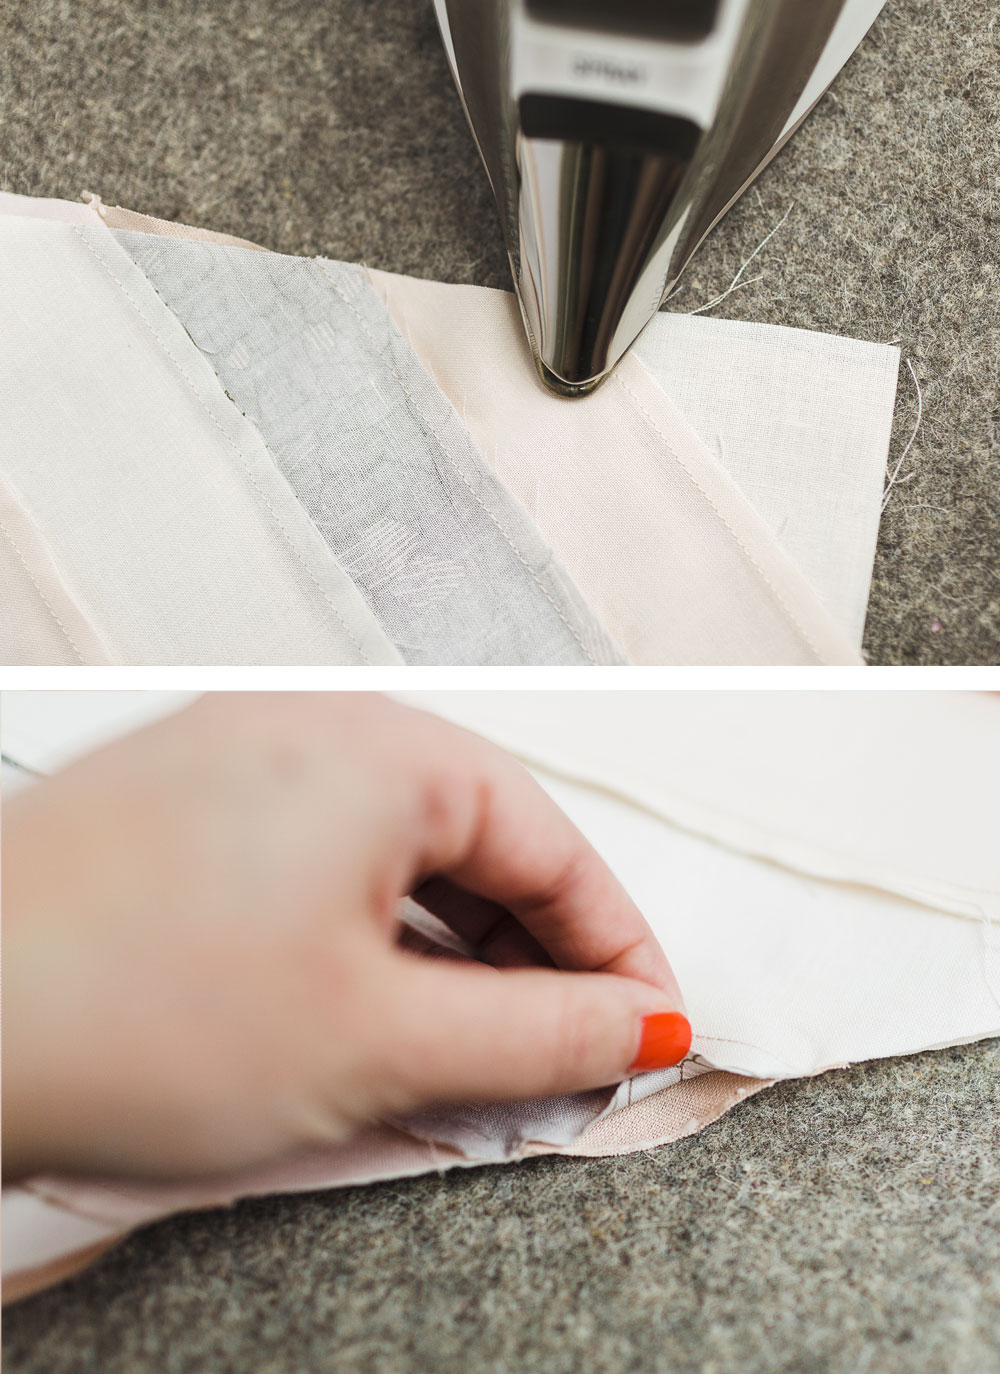 A complete tutorial on how glue basting seams will create accurate quilting and quilt pieces. Step by step instructions with photos showing you how easy glue basting can be.